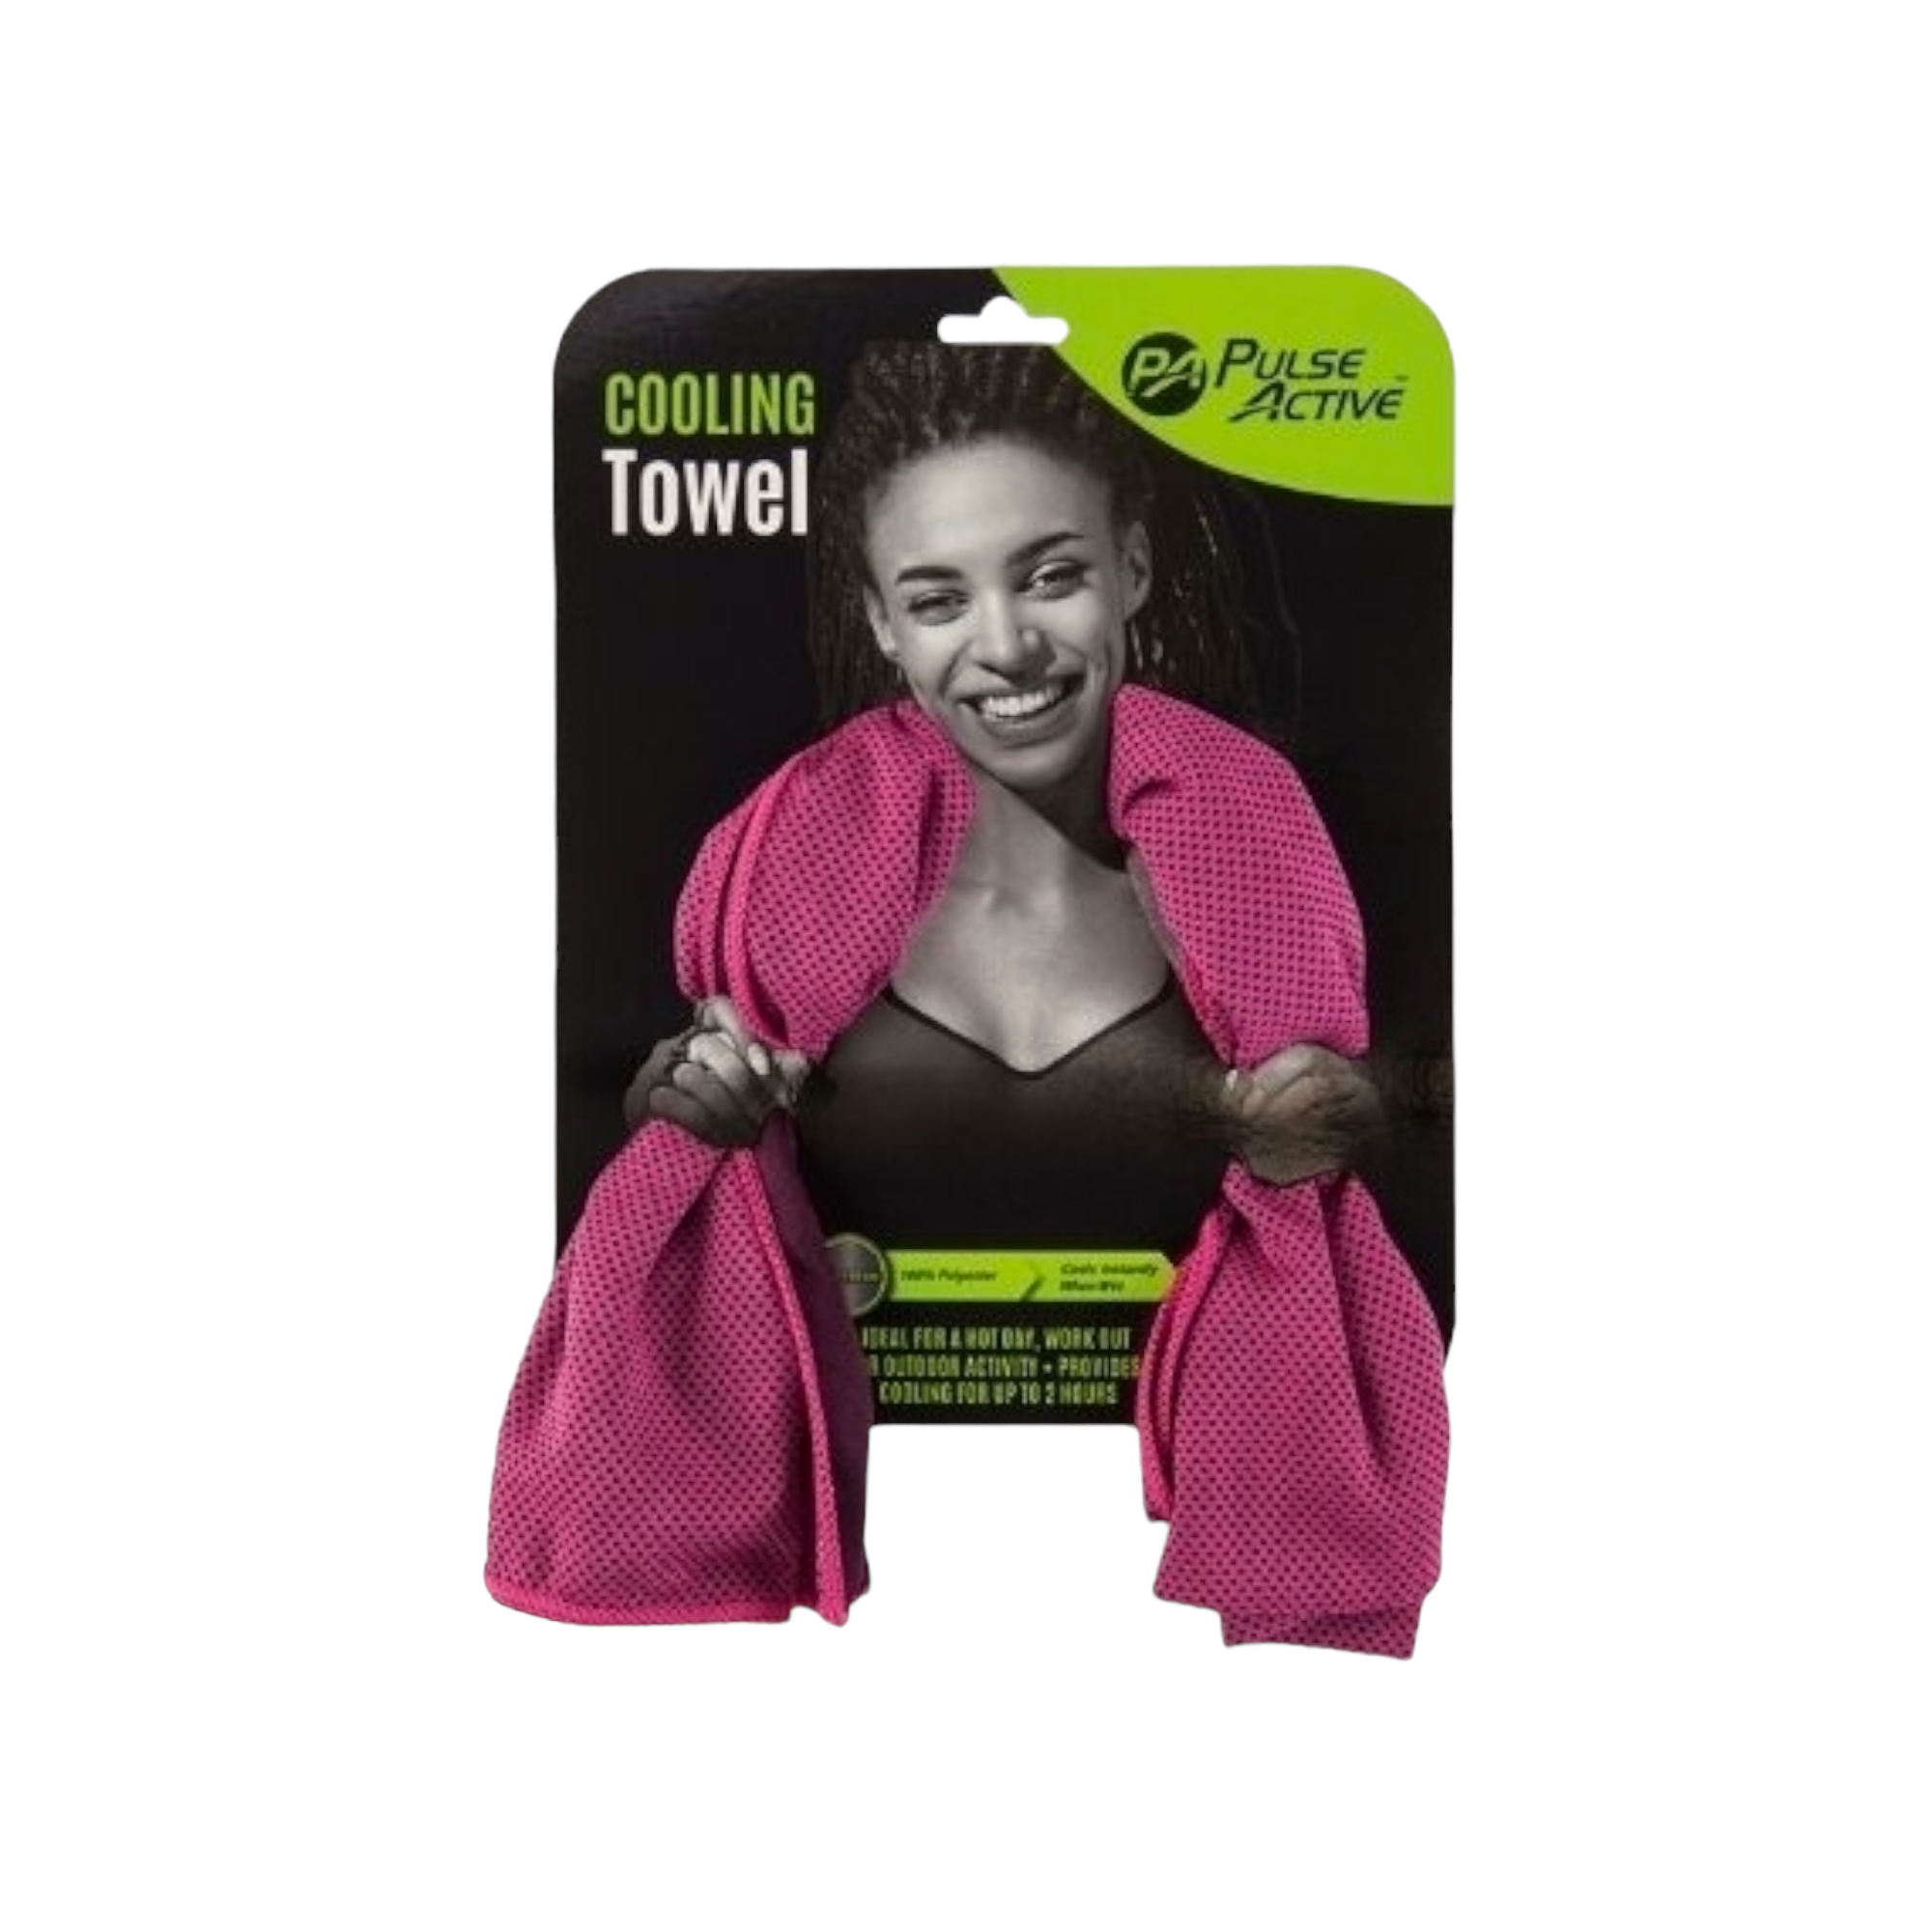 Fitness Gym Cooling Towel  100x30cm